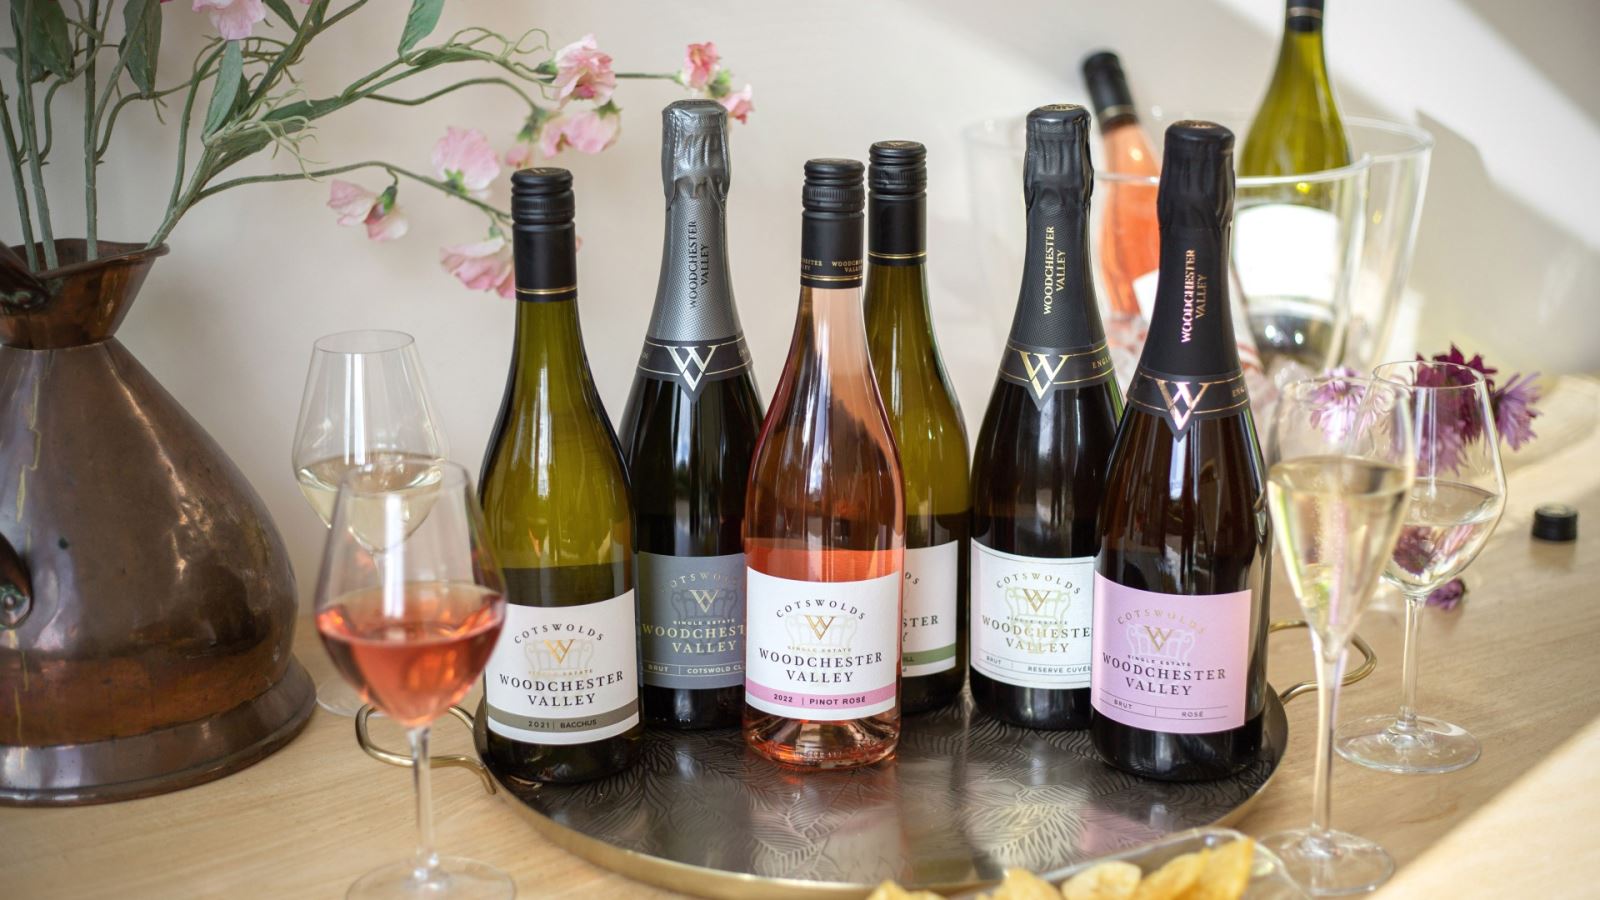 Woodchester Valley wines